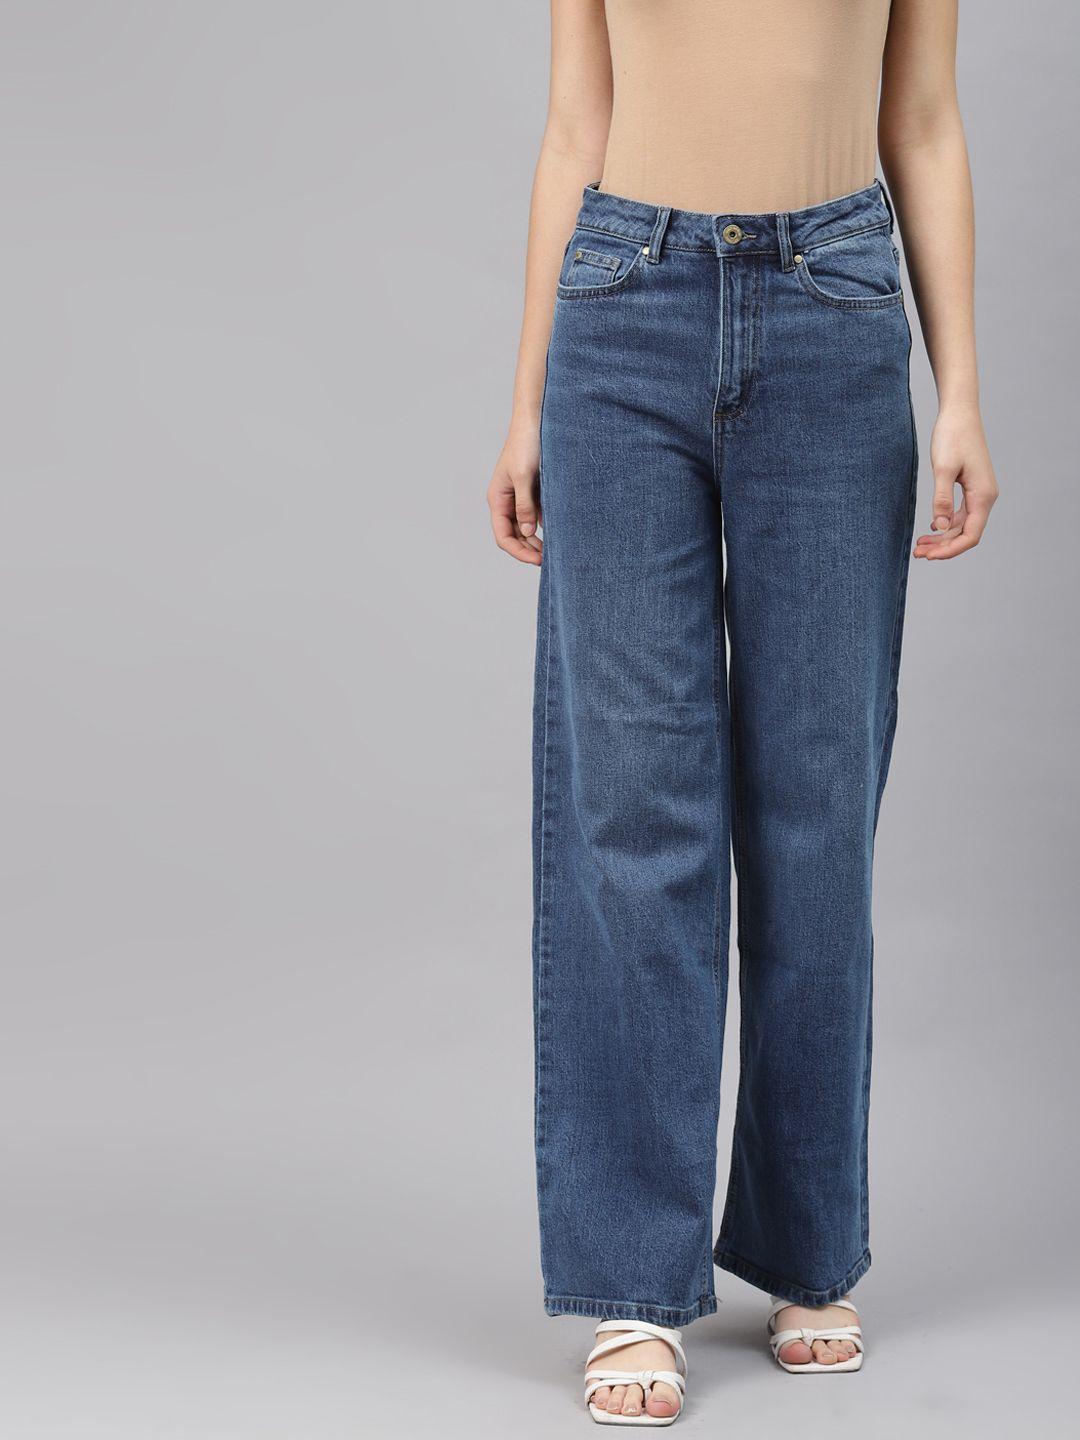 marks & spencer women blue wide leg light fade mid-rise stretchable jeans